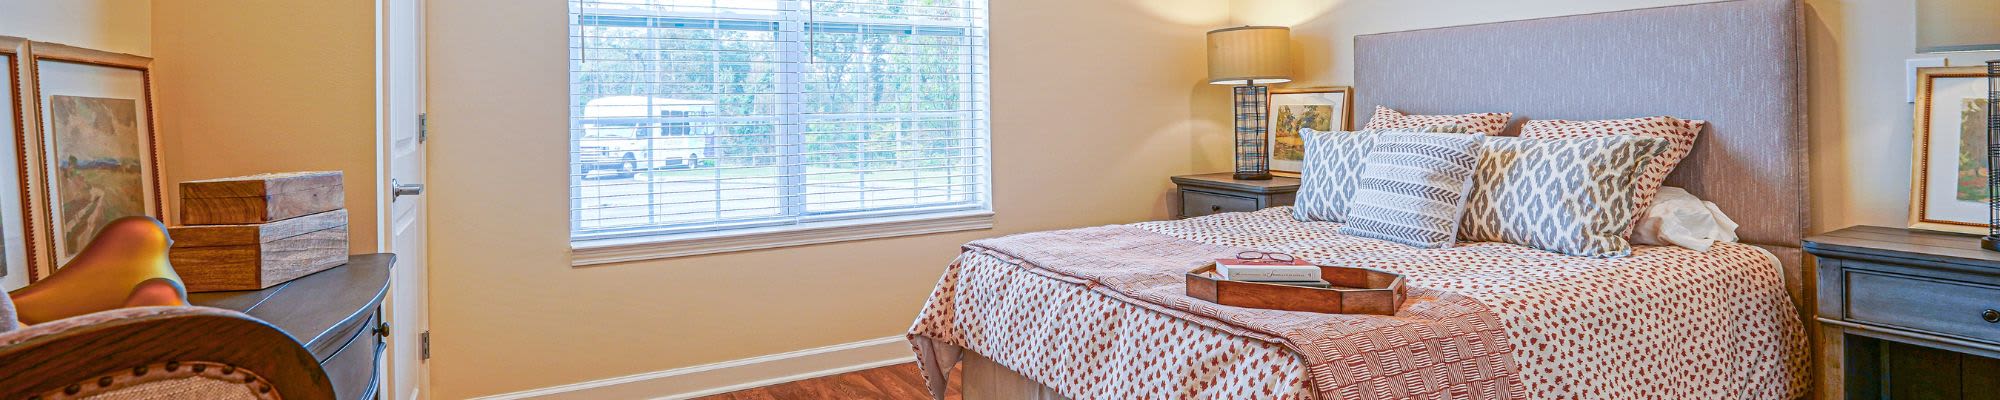 Memory Care at The Harmony Collection at Roanoke - Memory Care in Roanoke, Virginia